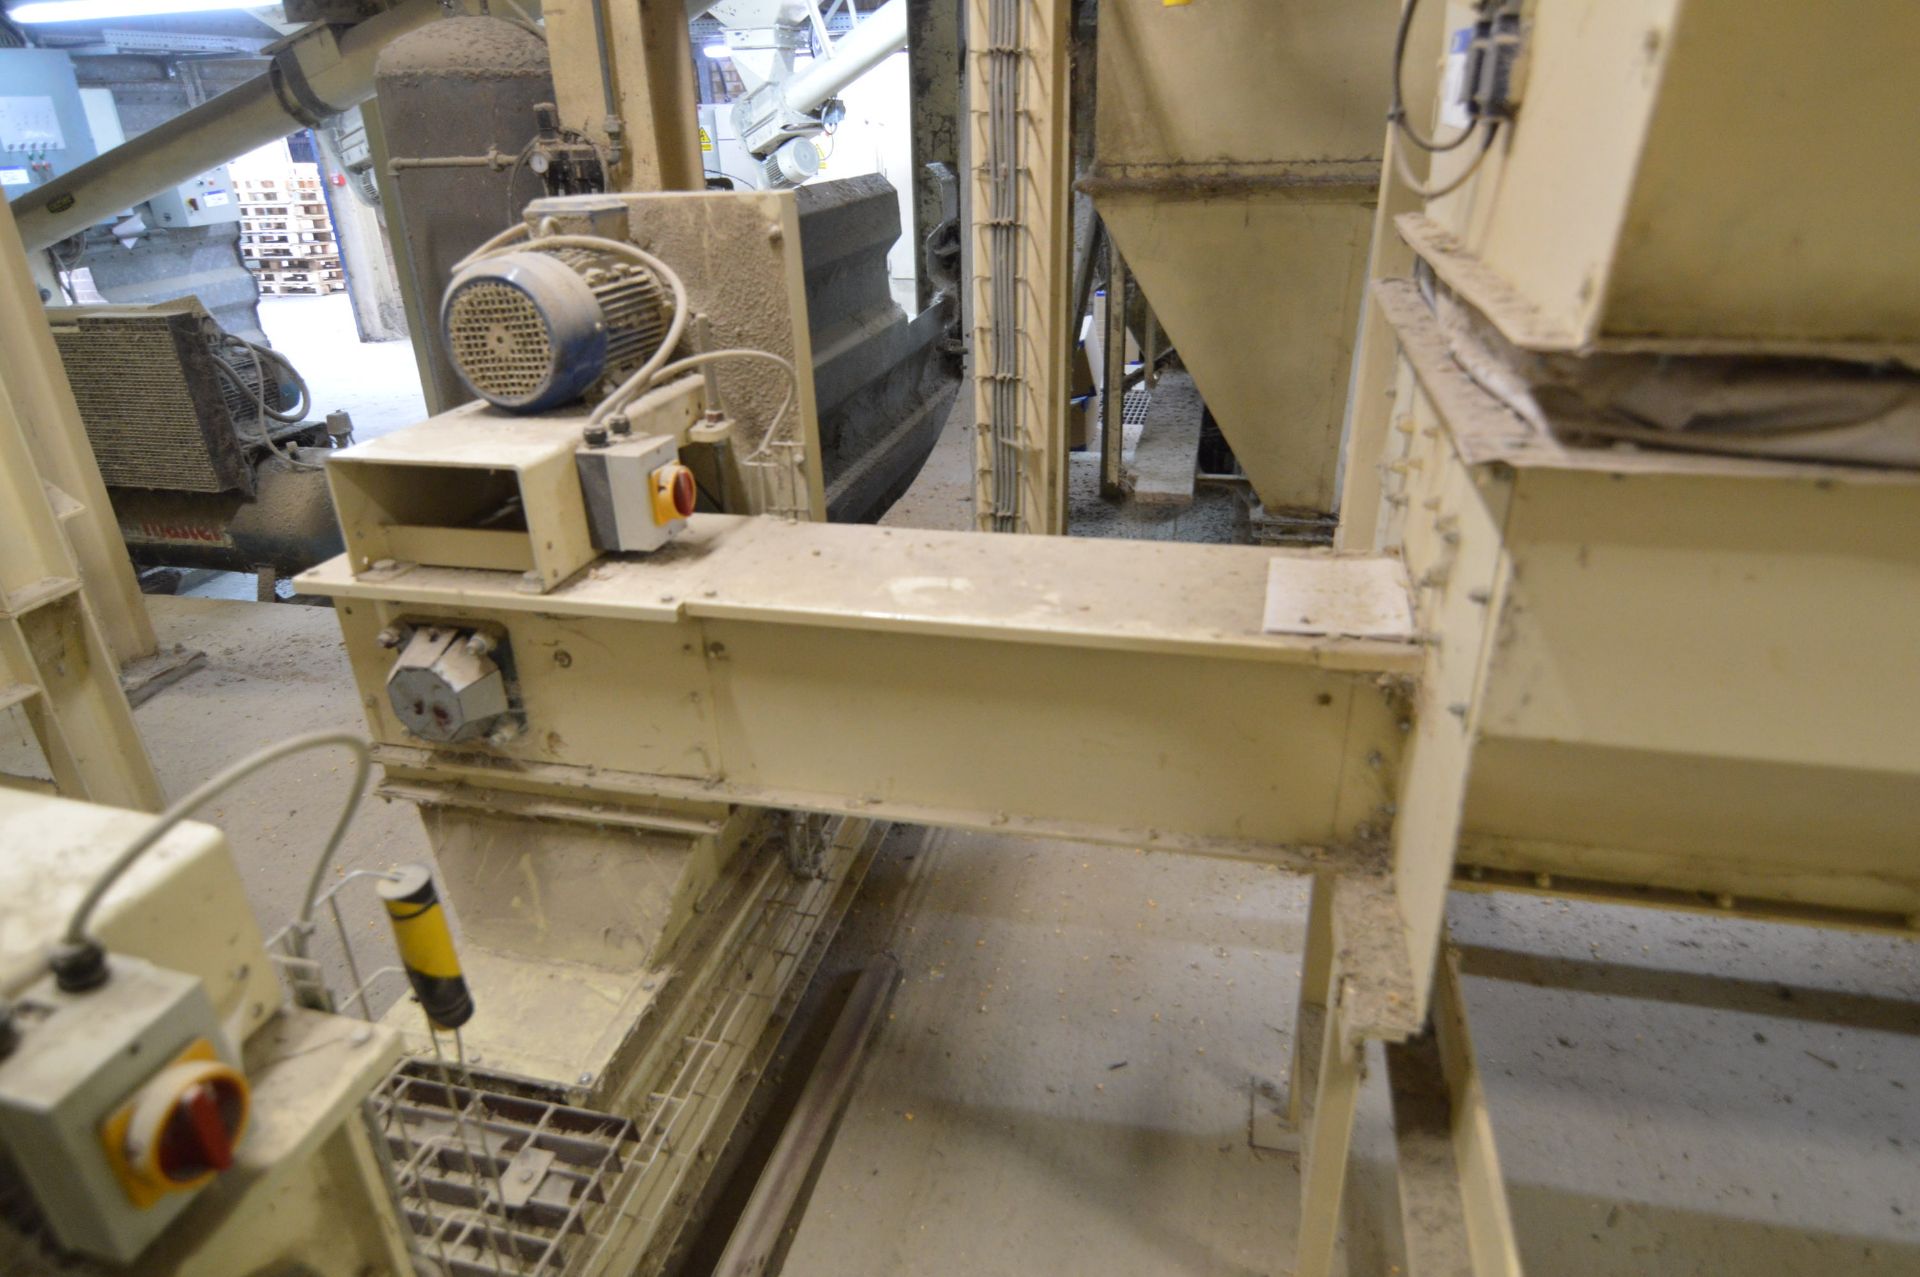 T A SHORE 1000kg & 500kg LOADCELL HOPPER WEIGHERS, installed 2011, with loadcells, steel supports, - Image 5 of 5